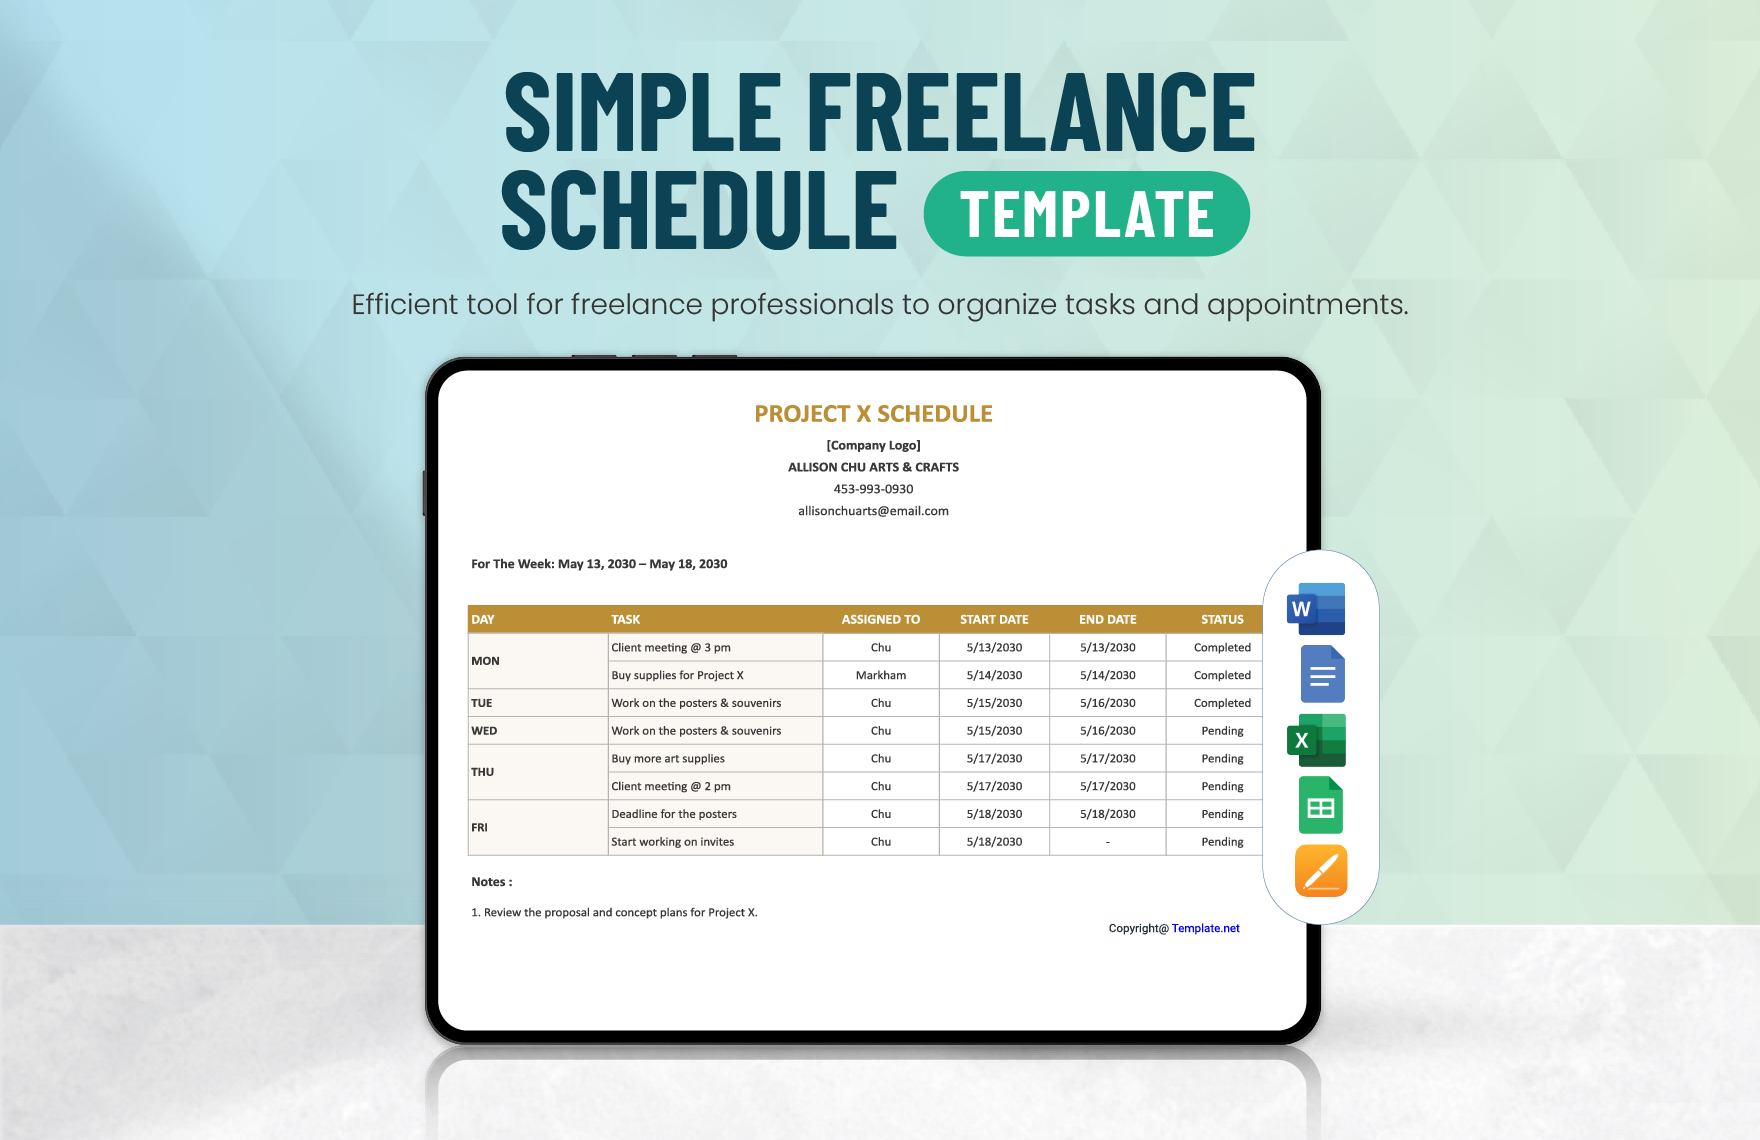 Free Simple Freelance Schedule Template in Word, Google Docs, Excel, Google Sheets, Apple Pages